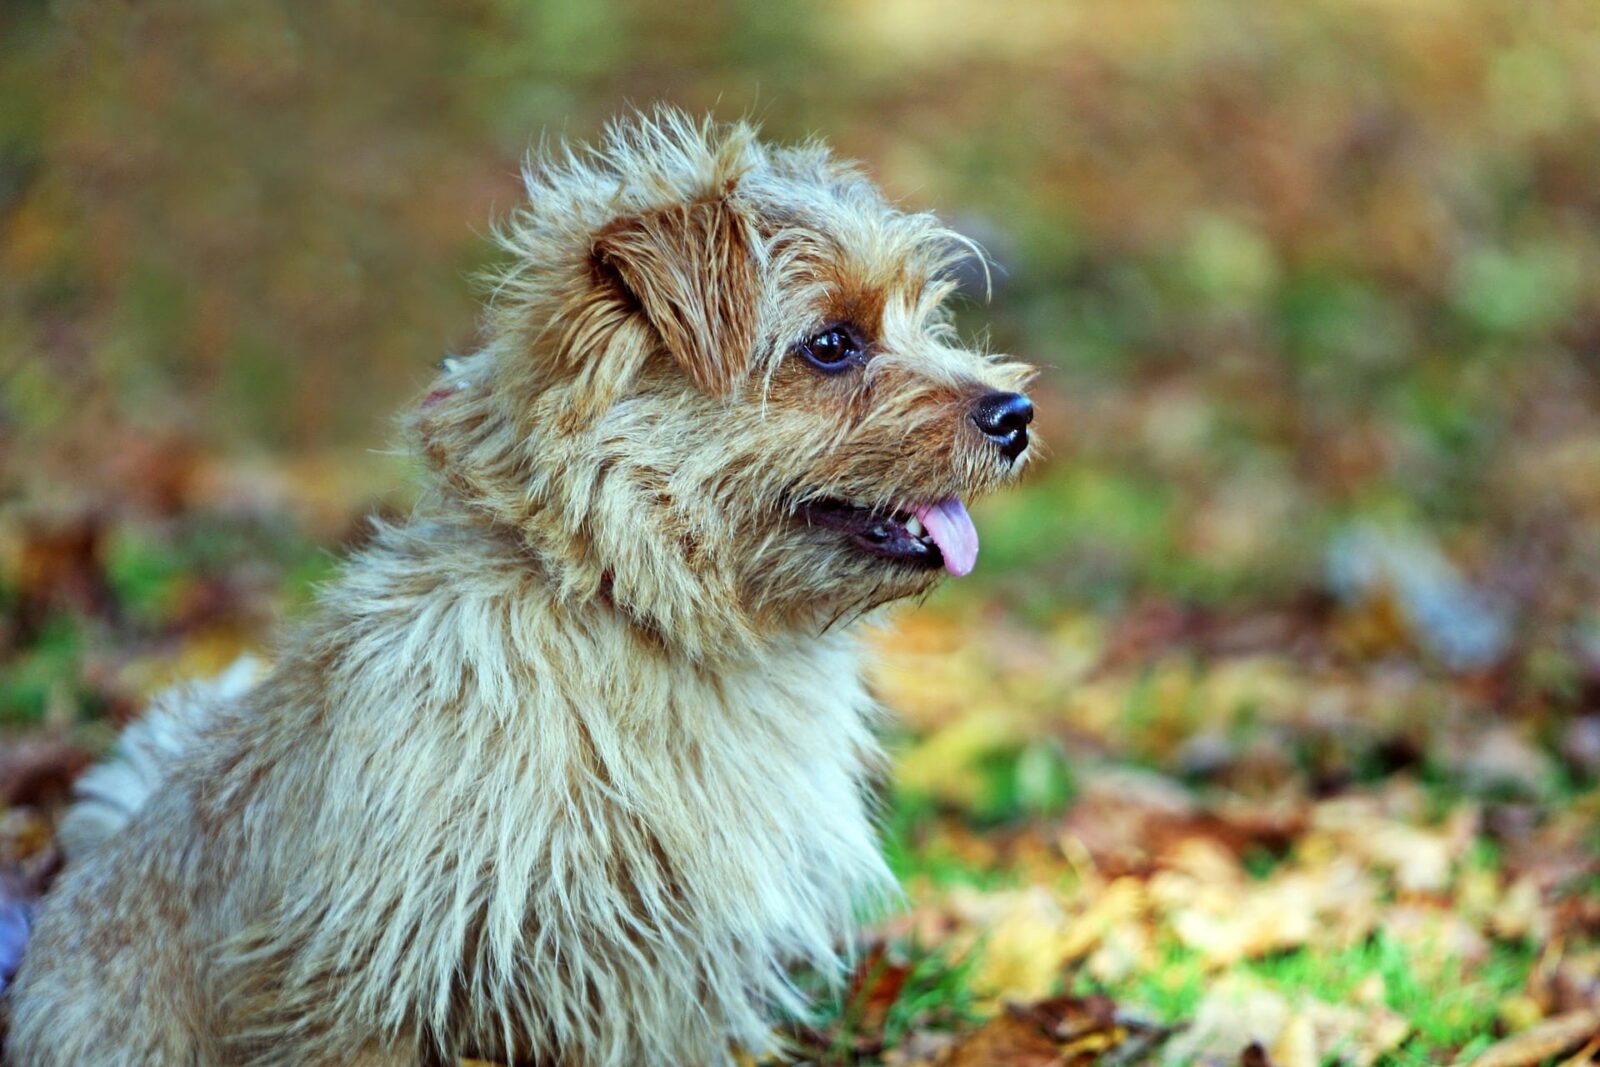 What Wild Animal Are You? Norfolk Terrier